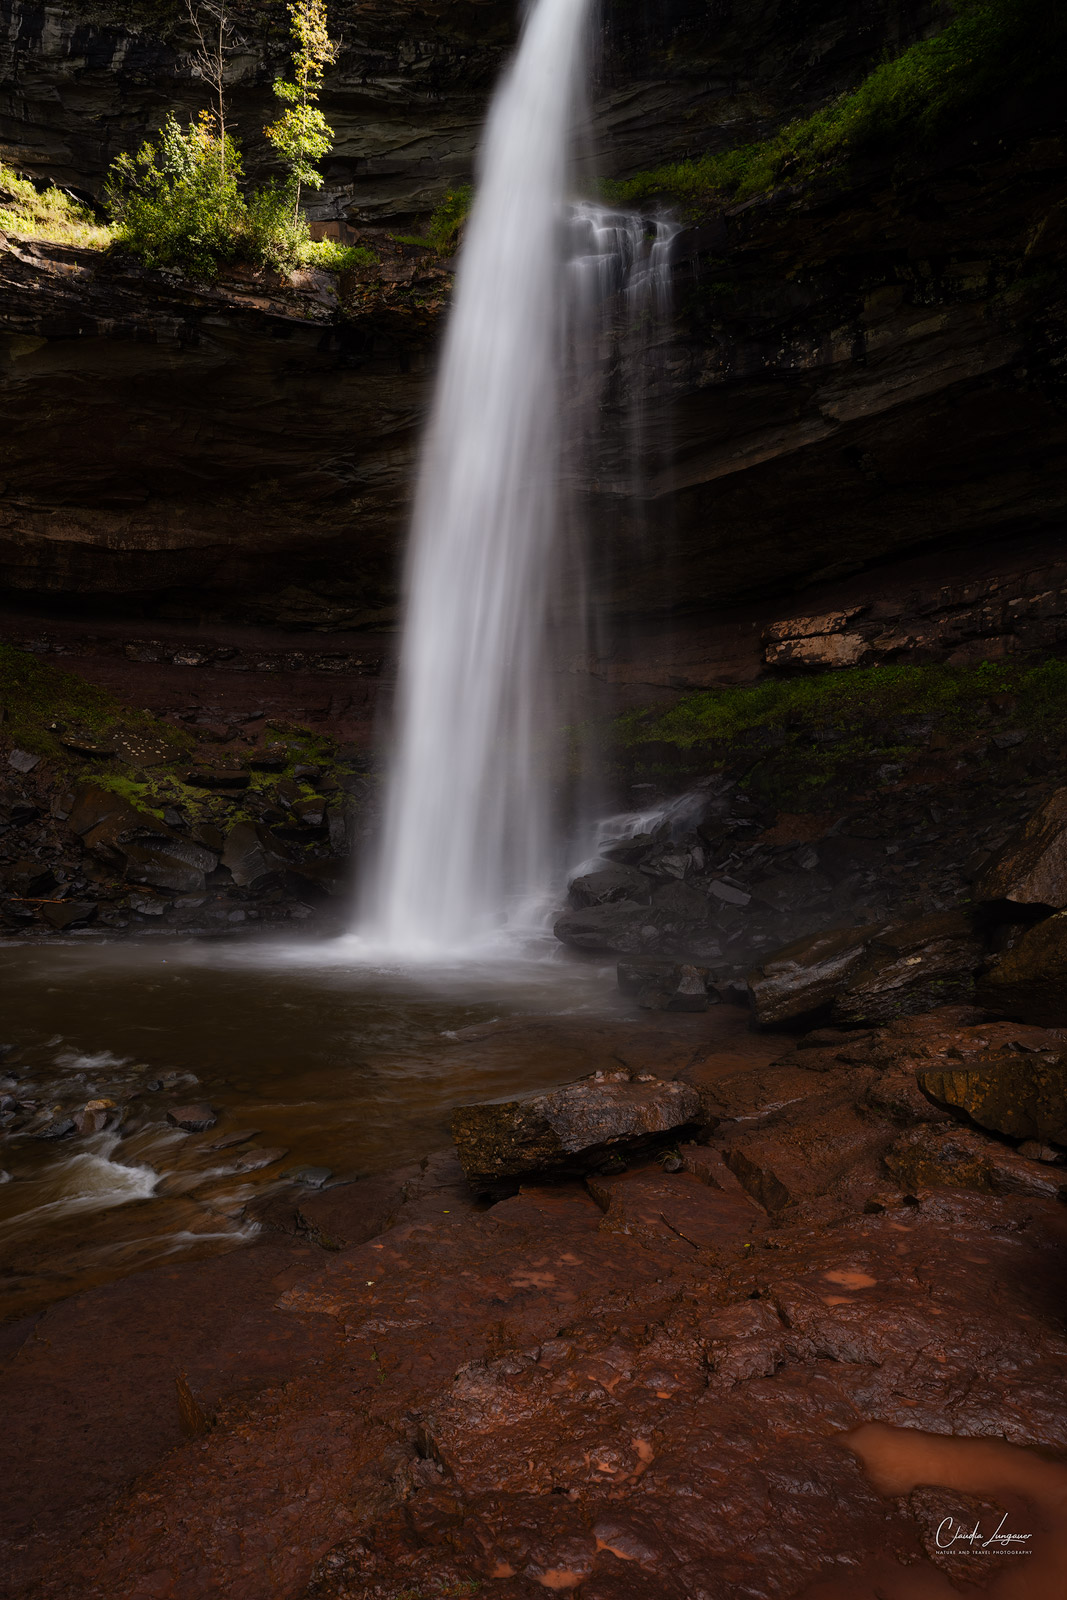 View of Kaaterskill Falls in the eastern Catskill Mountains of New York.